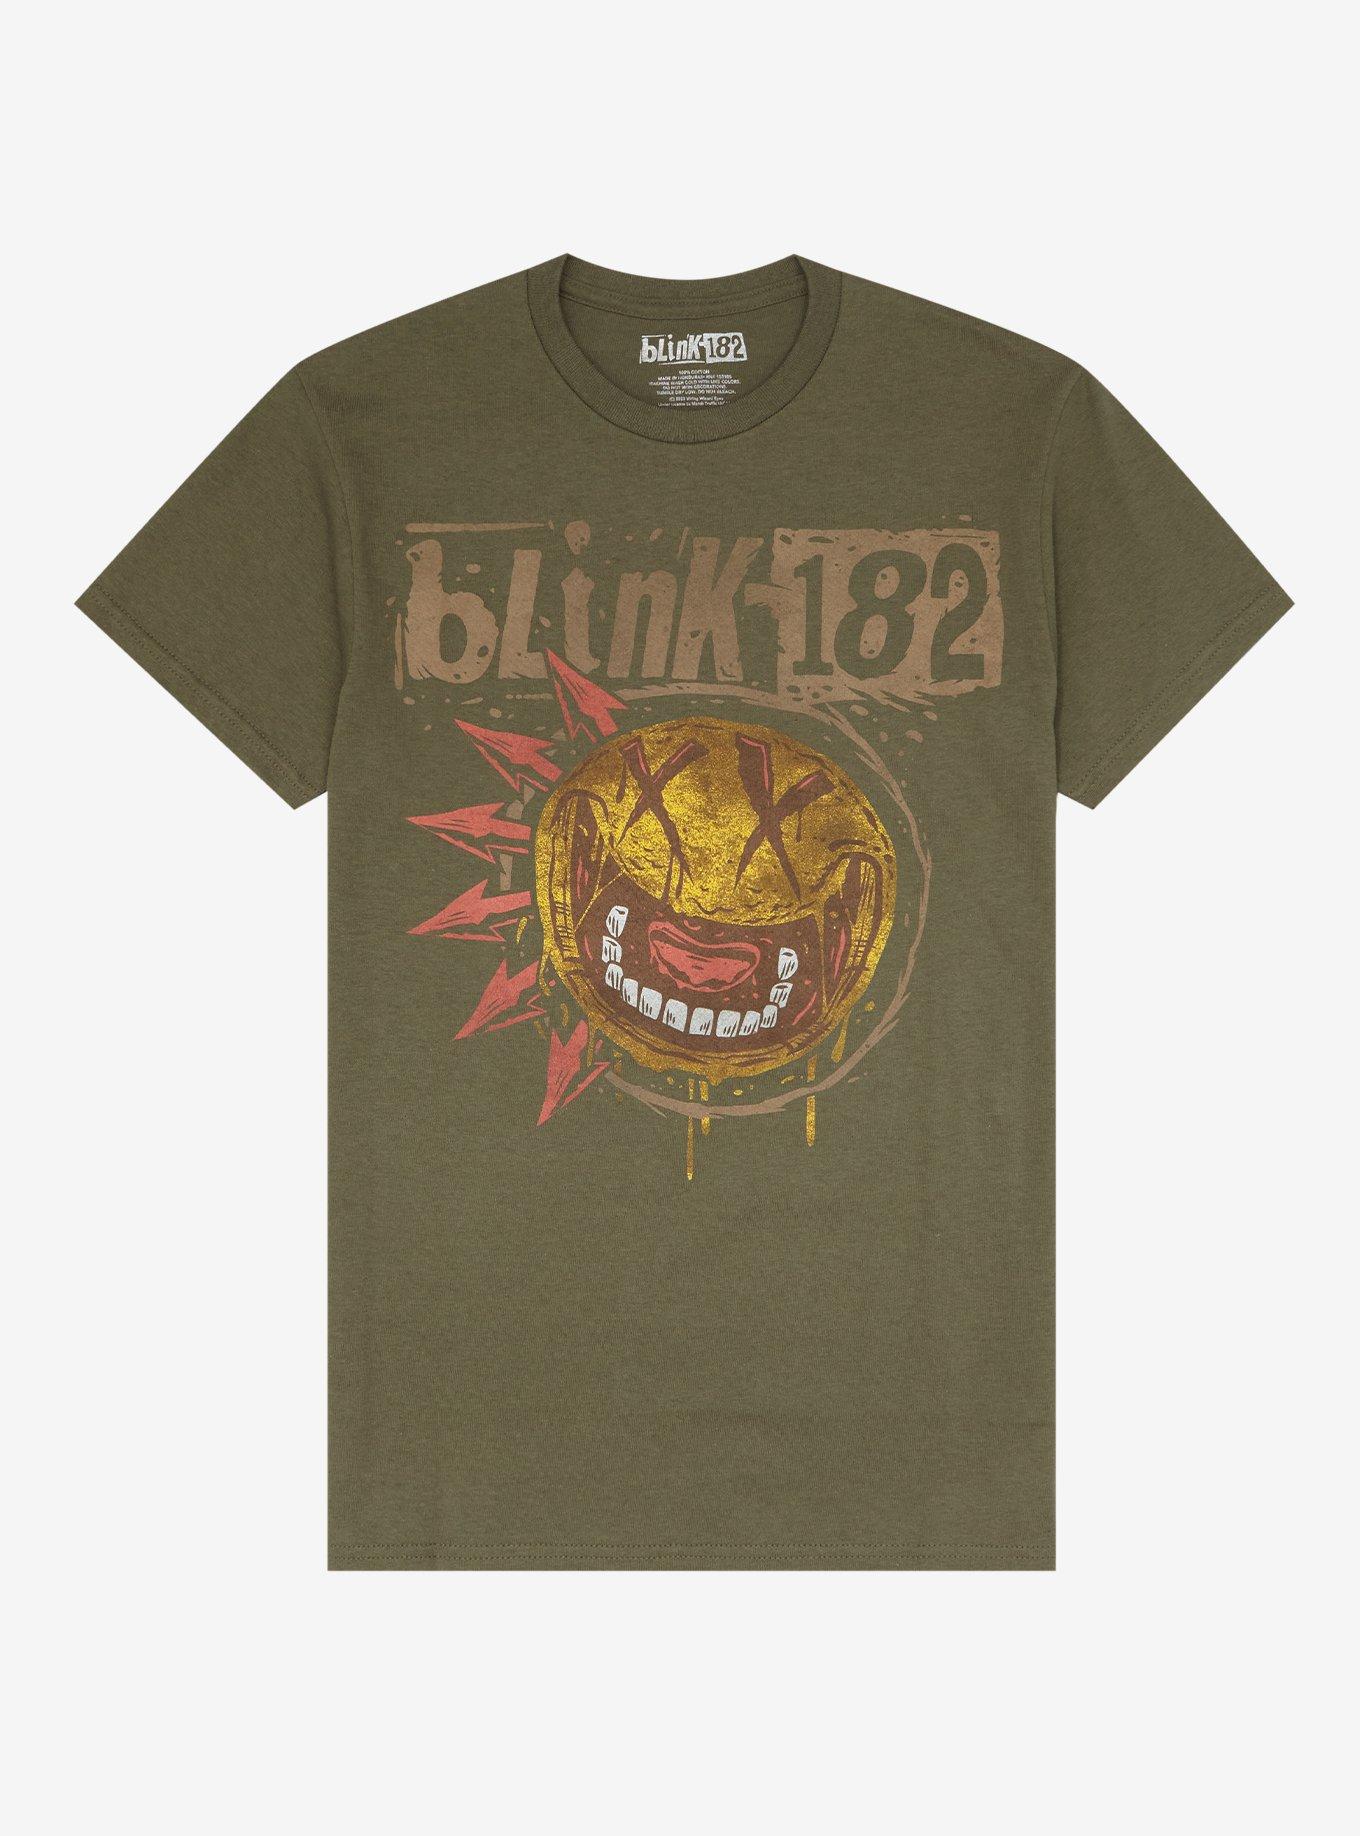 Blink-182 Smile Face With Teeth Boyfriend Fit Girls T-Shirt, MILITARY GREEN, hi-res